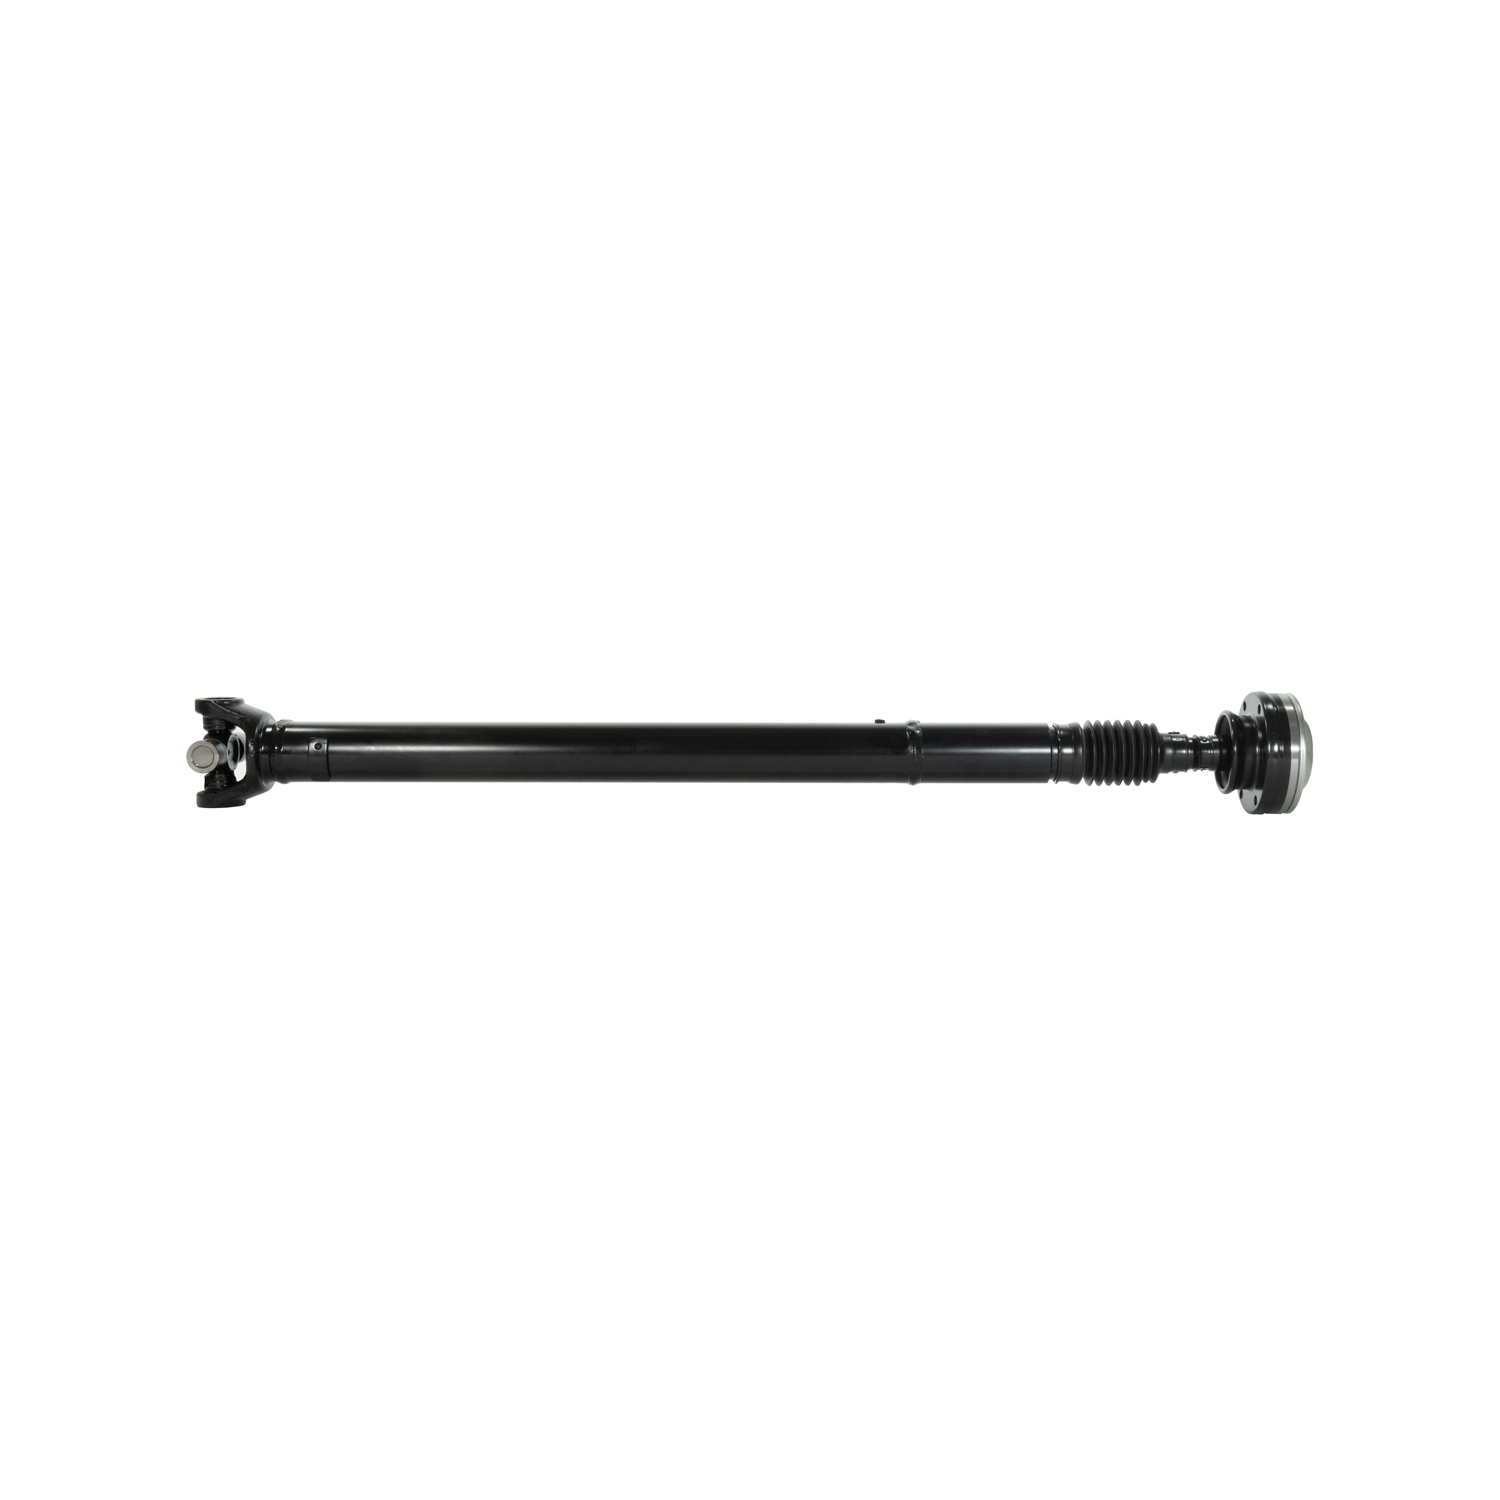 USA Standard ZDS9767 Front Driveshaft, For Grand Cherokee Larado, 33.25 in. Flange To Center